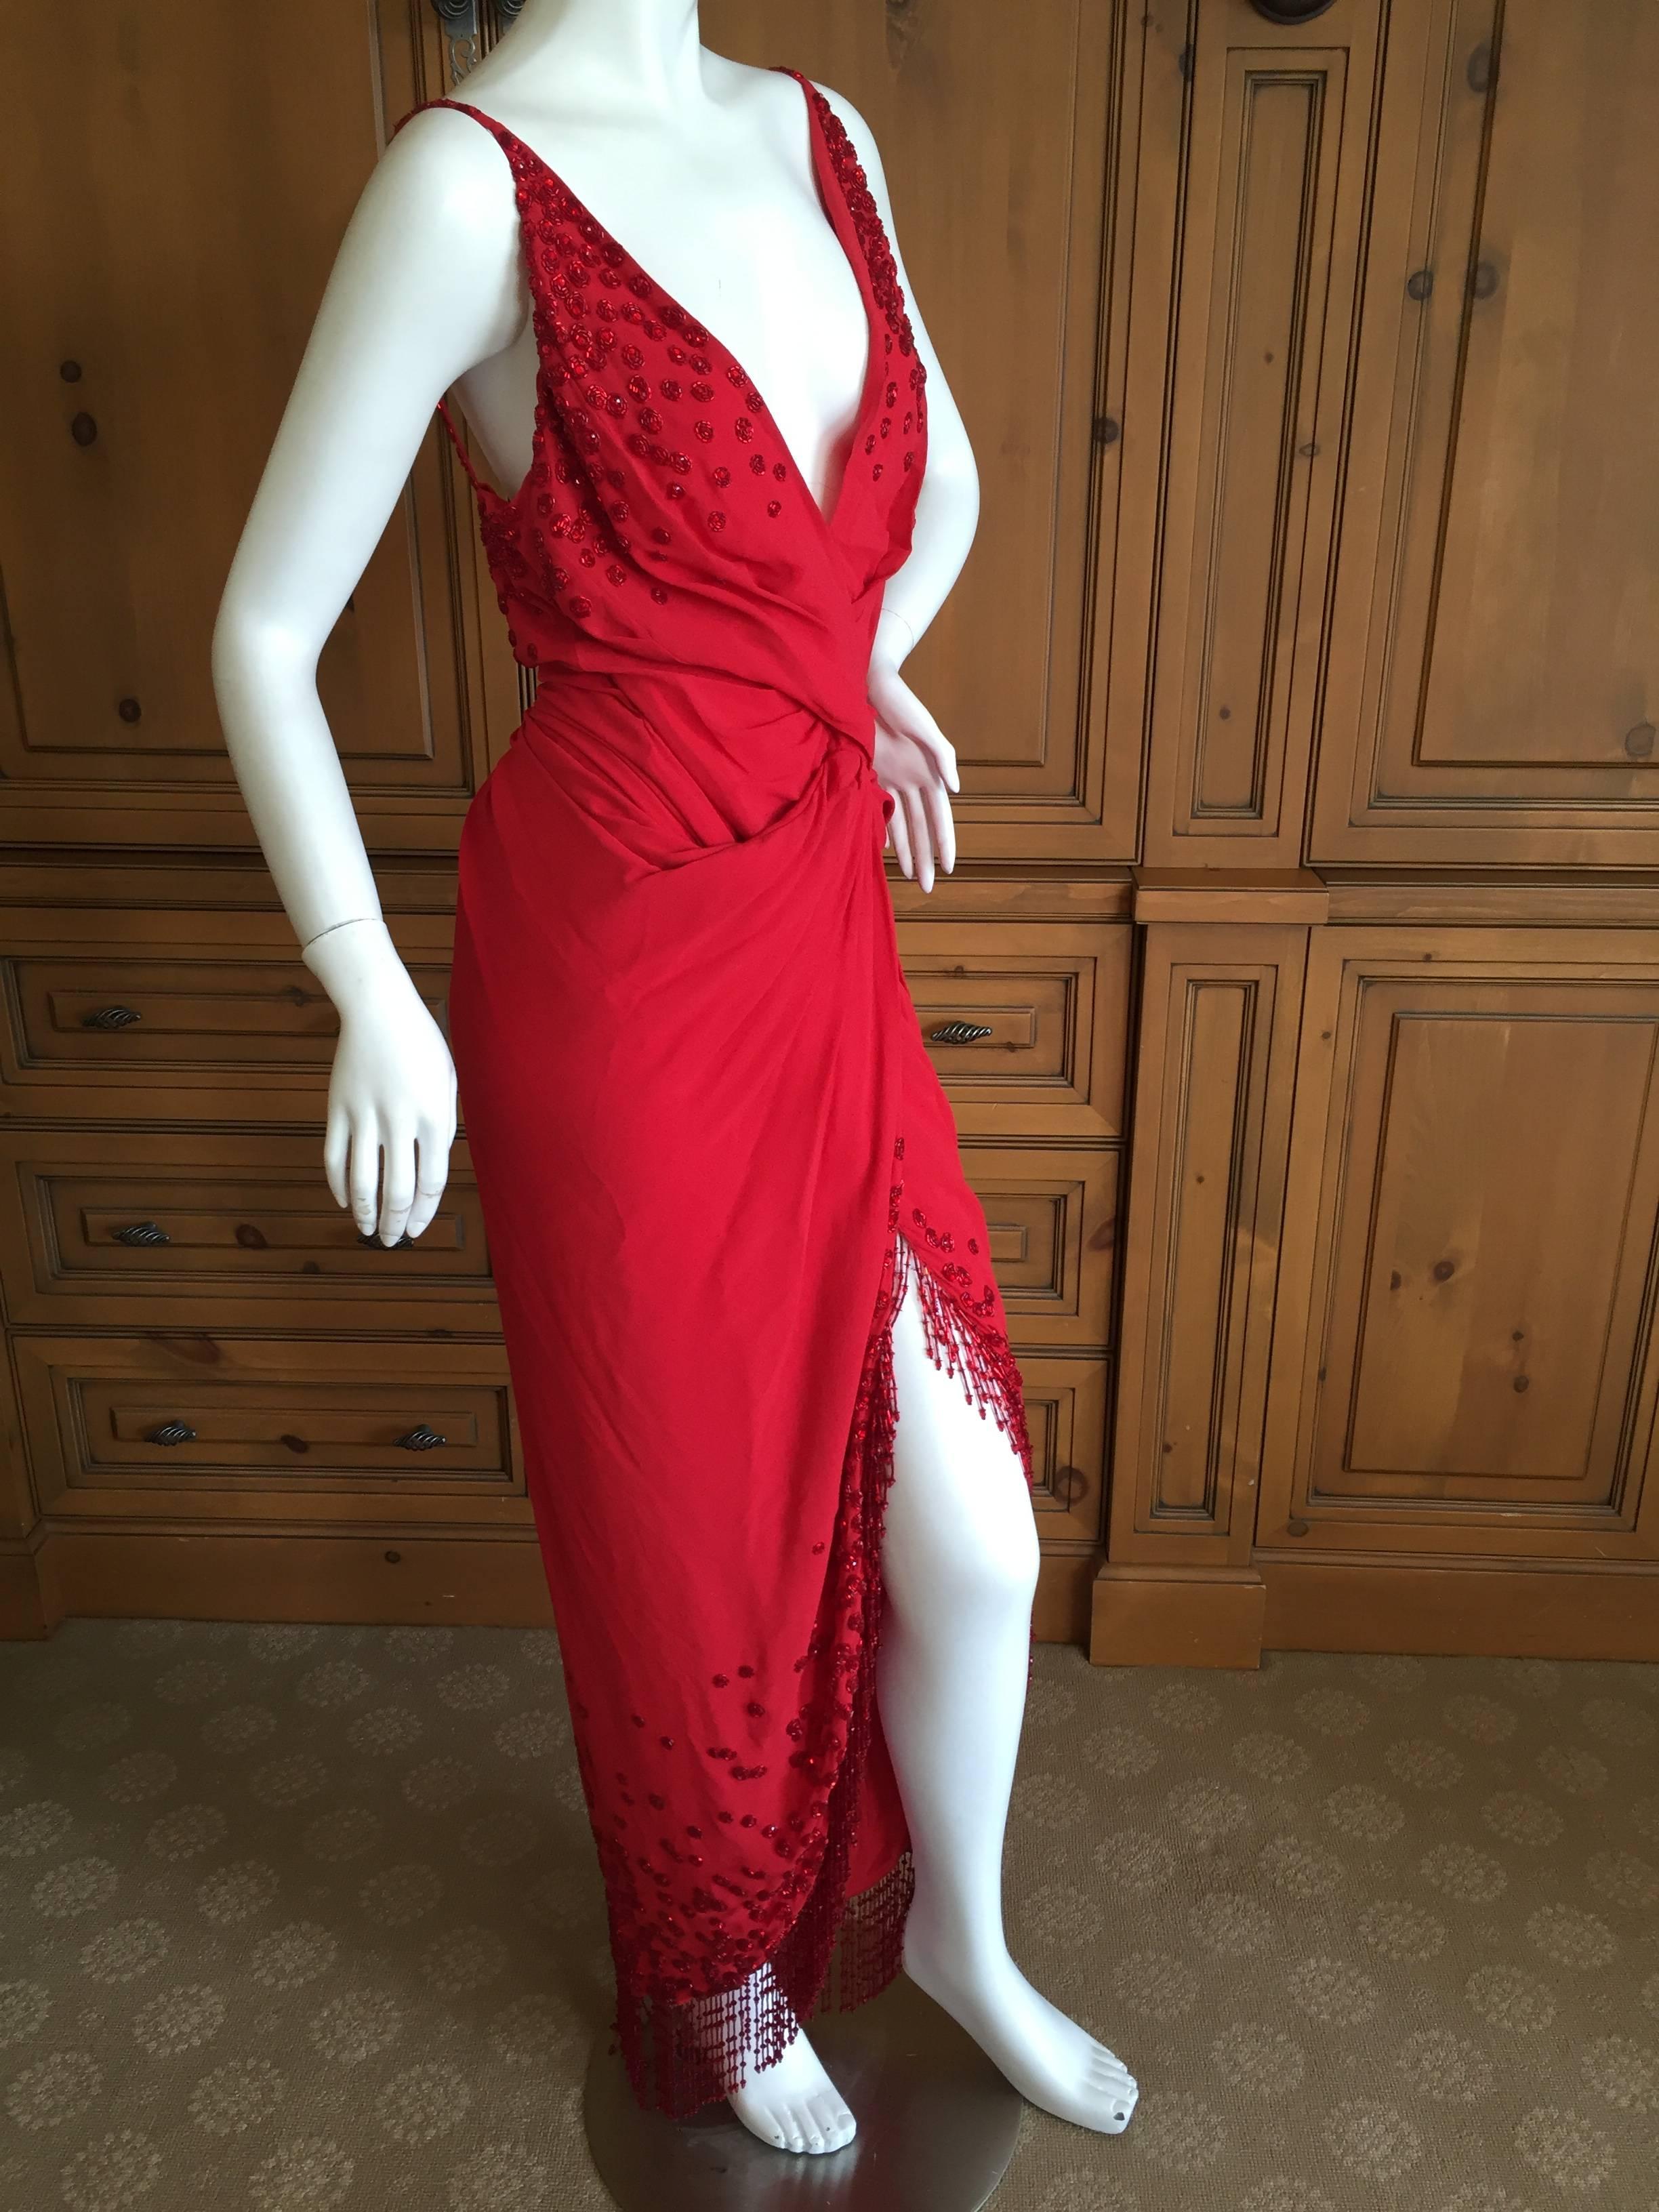 Christian Dior Lady in Red Fringed Beaded Evening Dress by Galliano 1